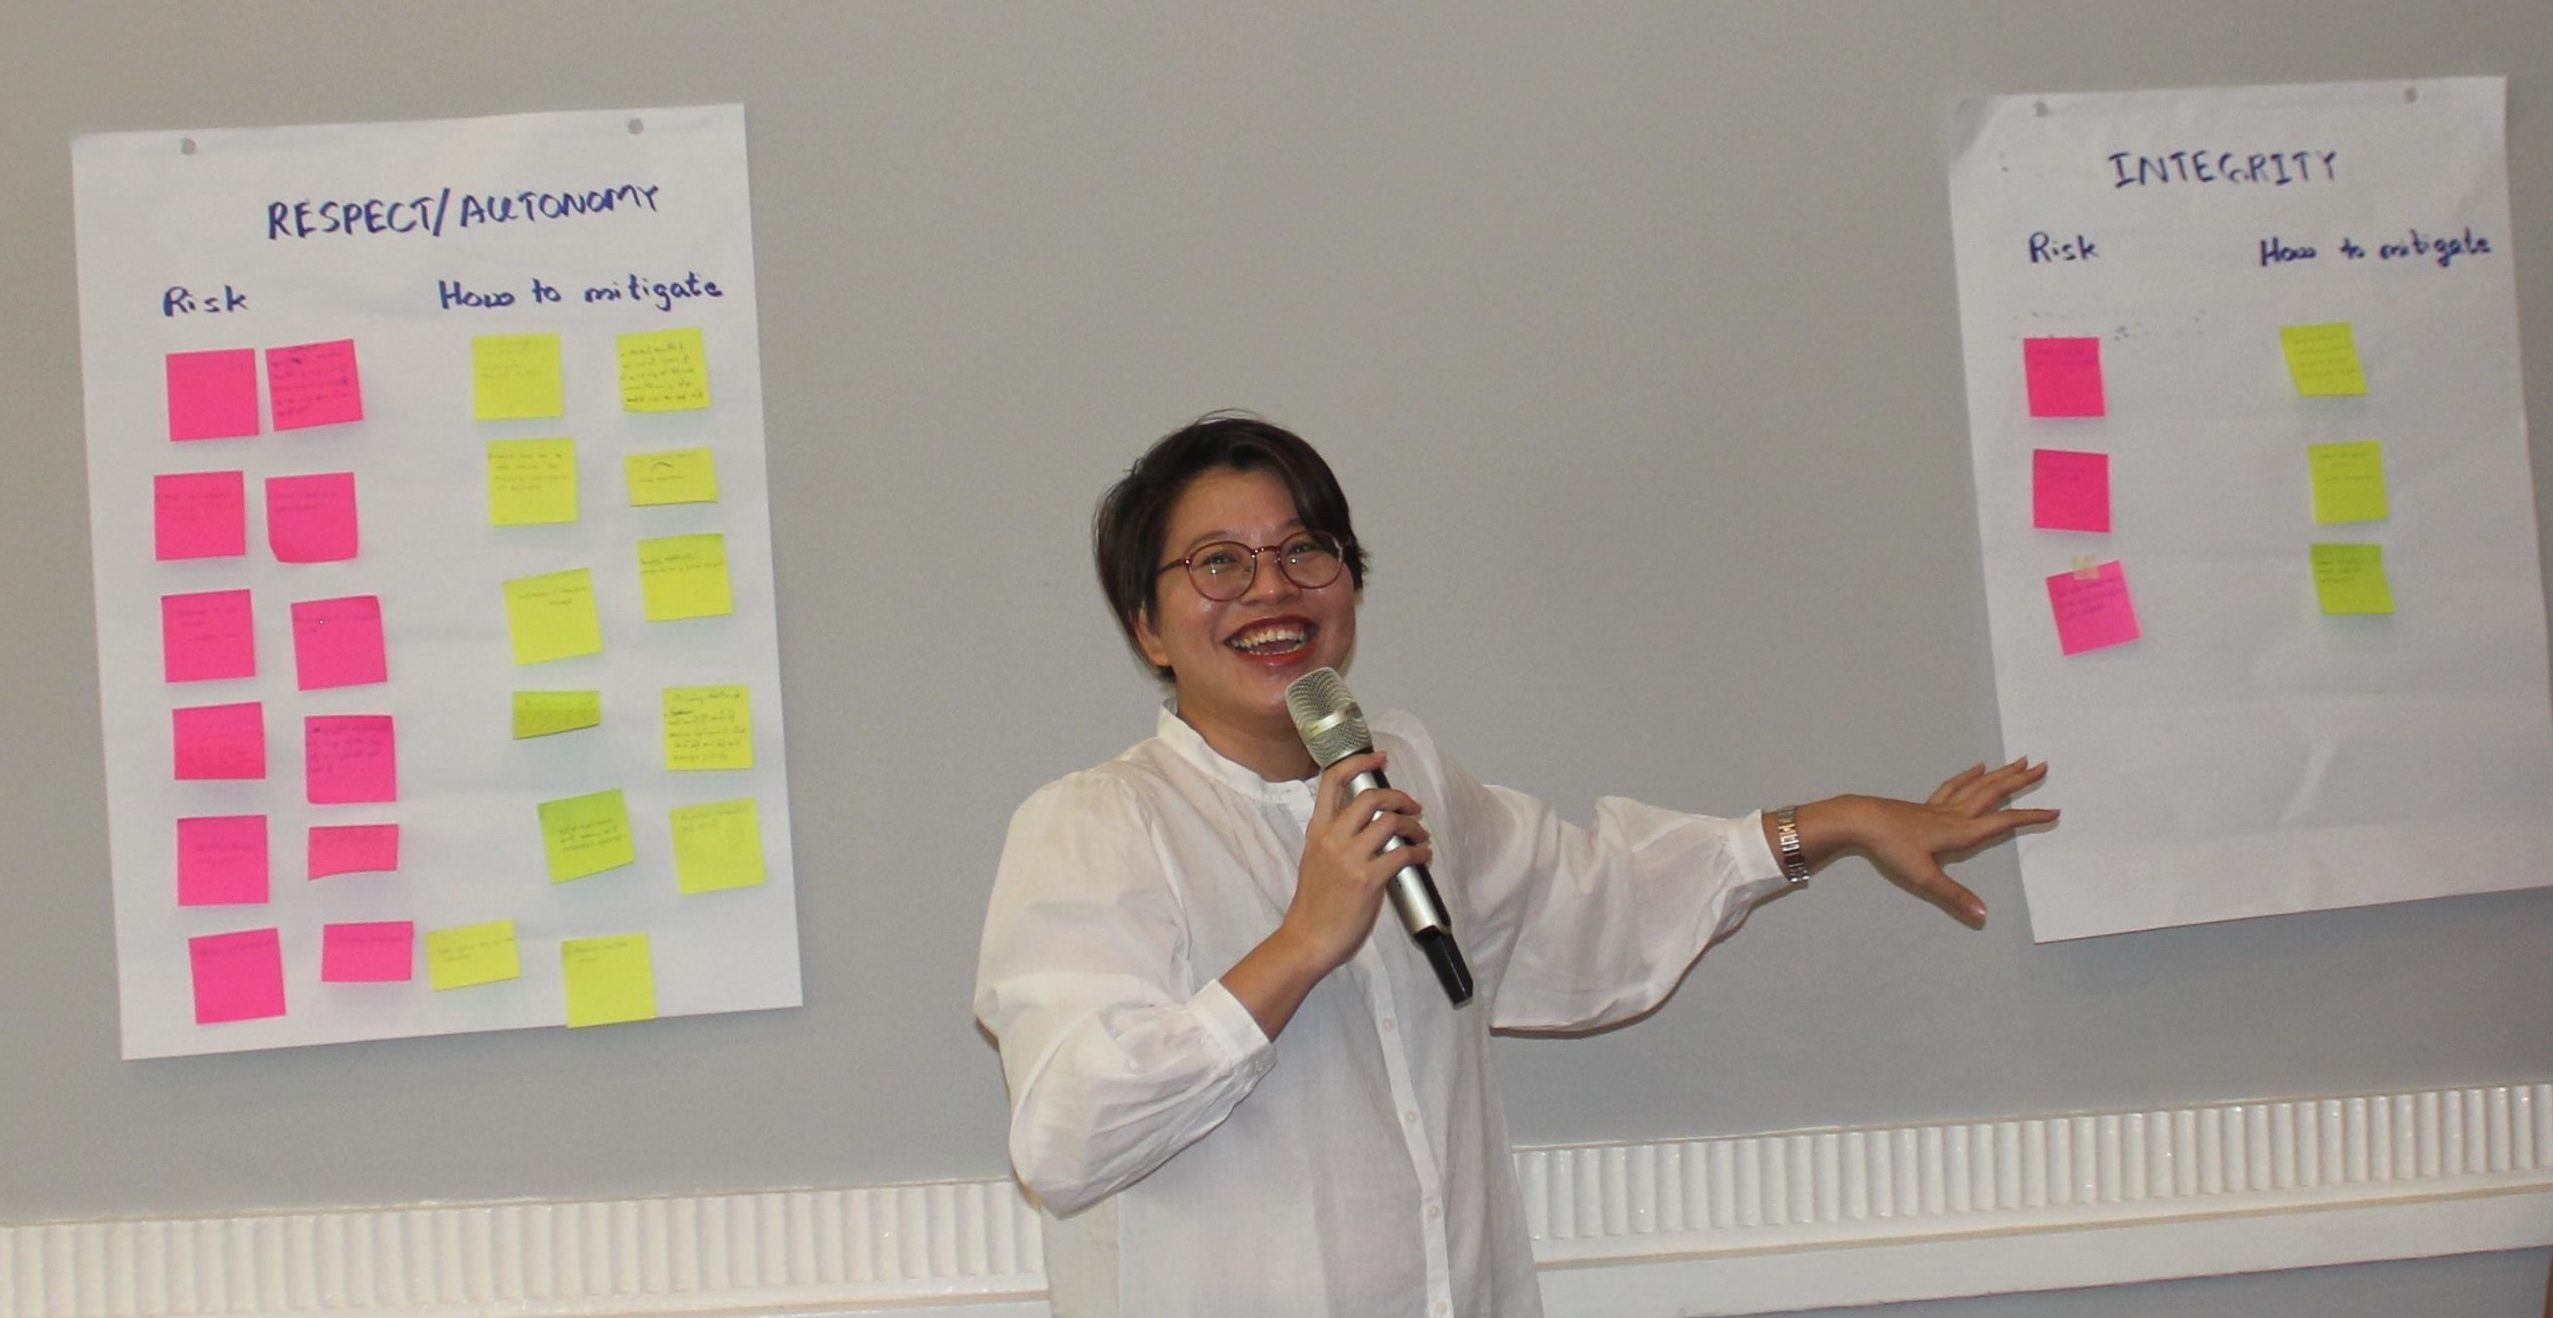 A smiling Burmese woman stands pointing to post-its on a wall while speaking into a microphone